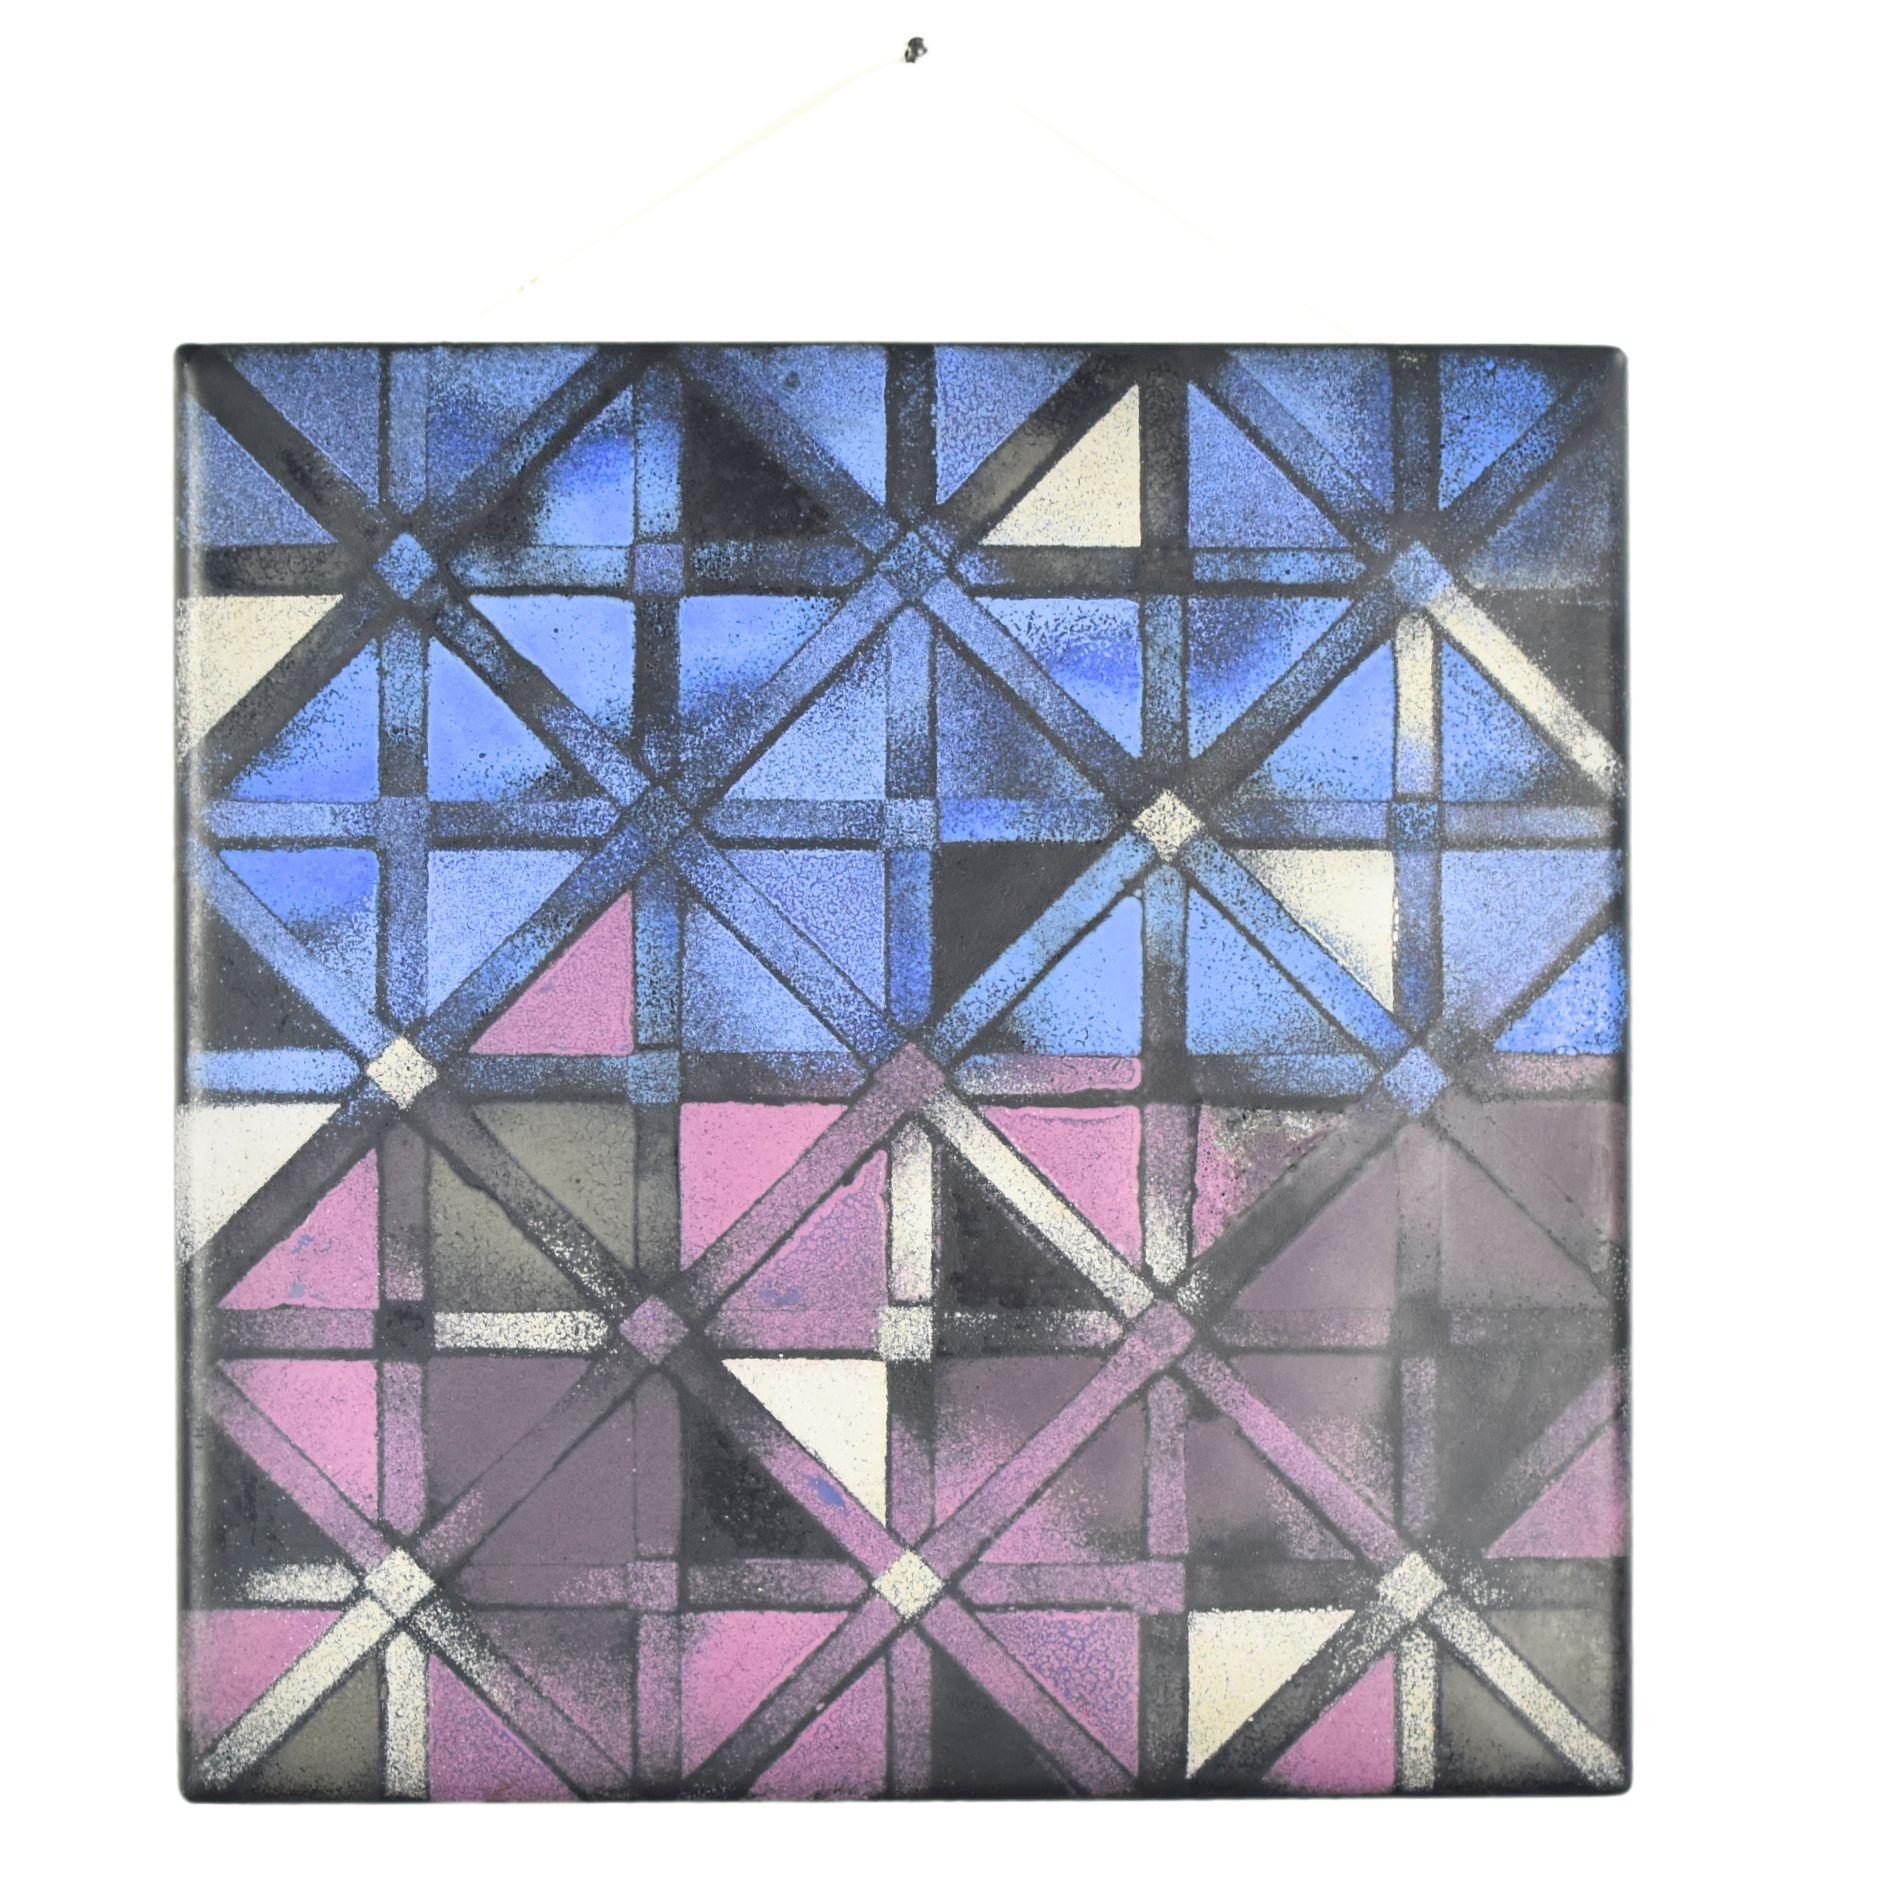 Striking modernist enameled wall panel with a geometric pattern in purple, blue, silver and black tones signed by C.P. Koch and dated 1966.